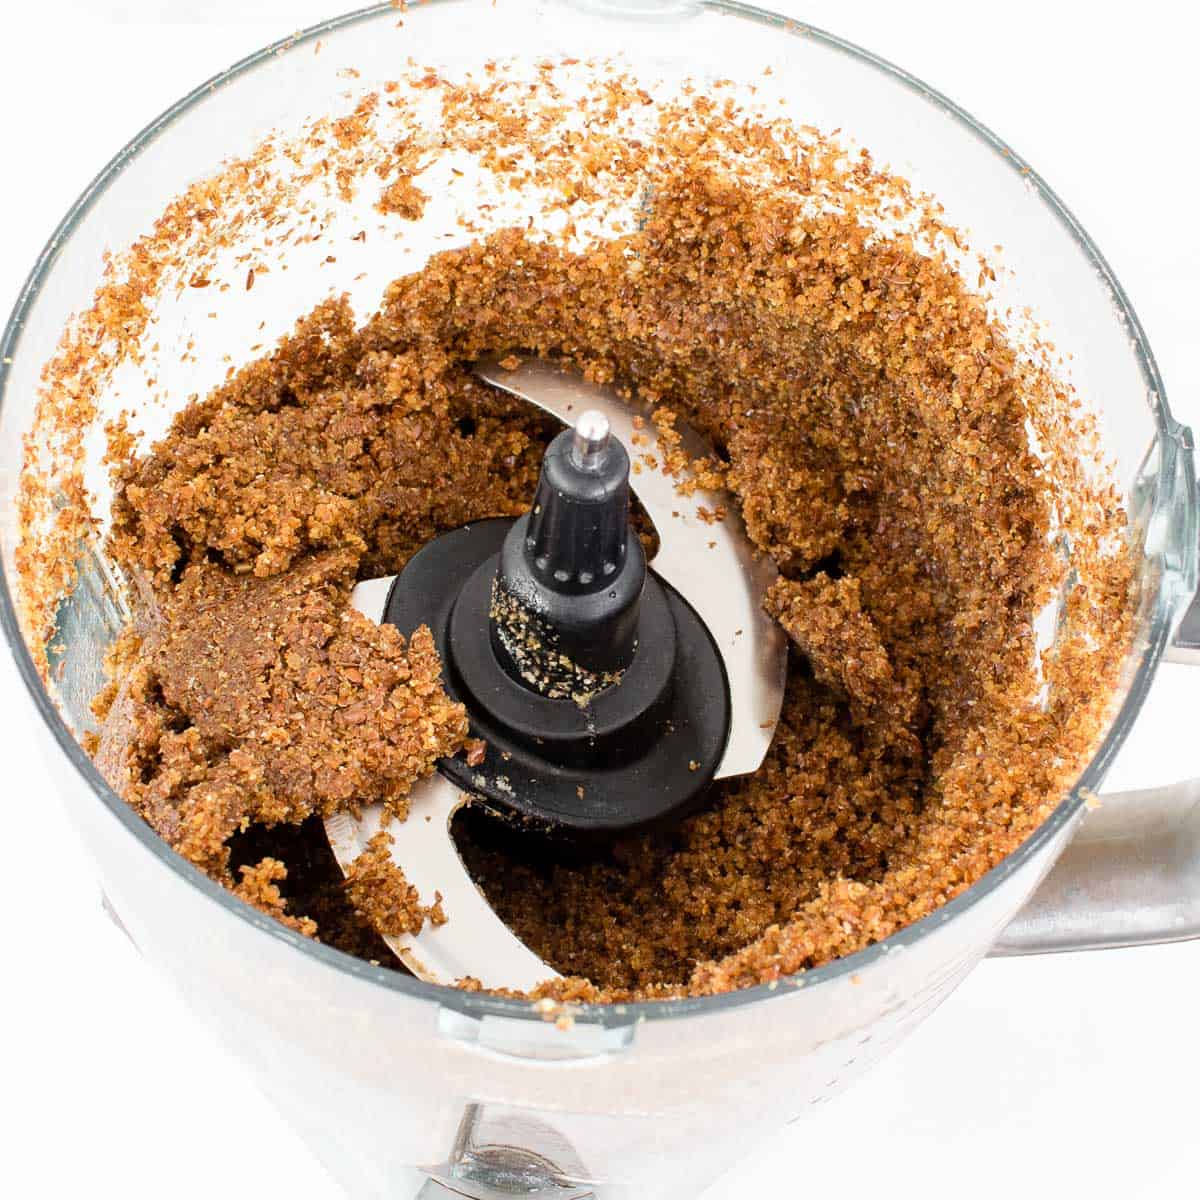 blended ingredients in the food processor. 